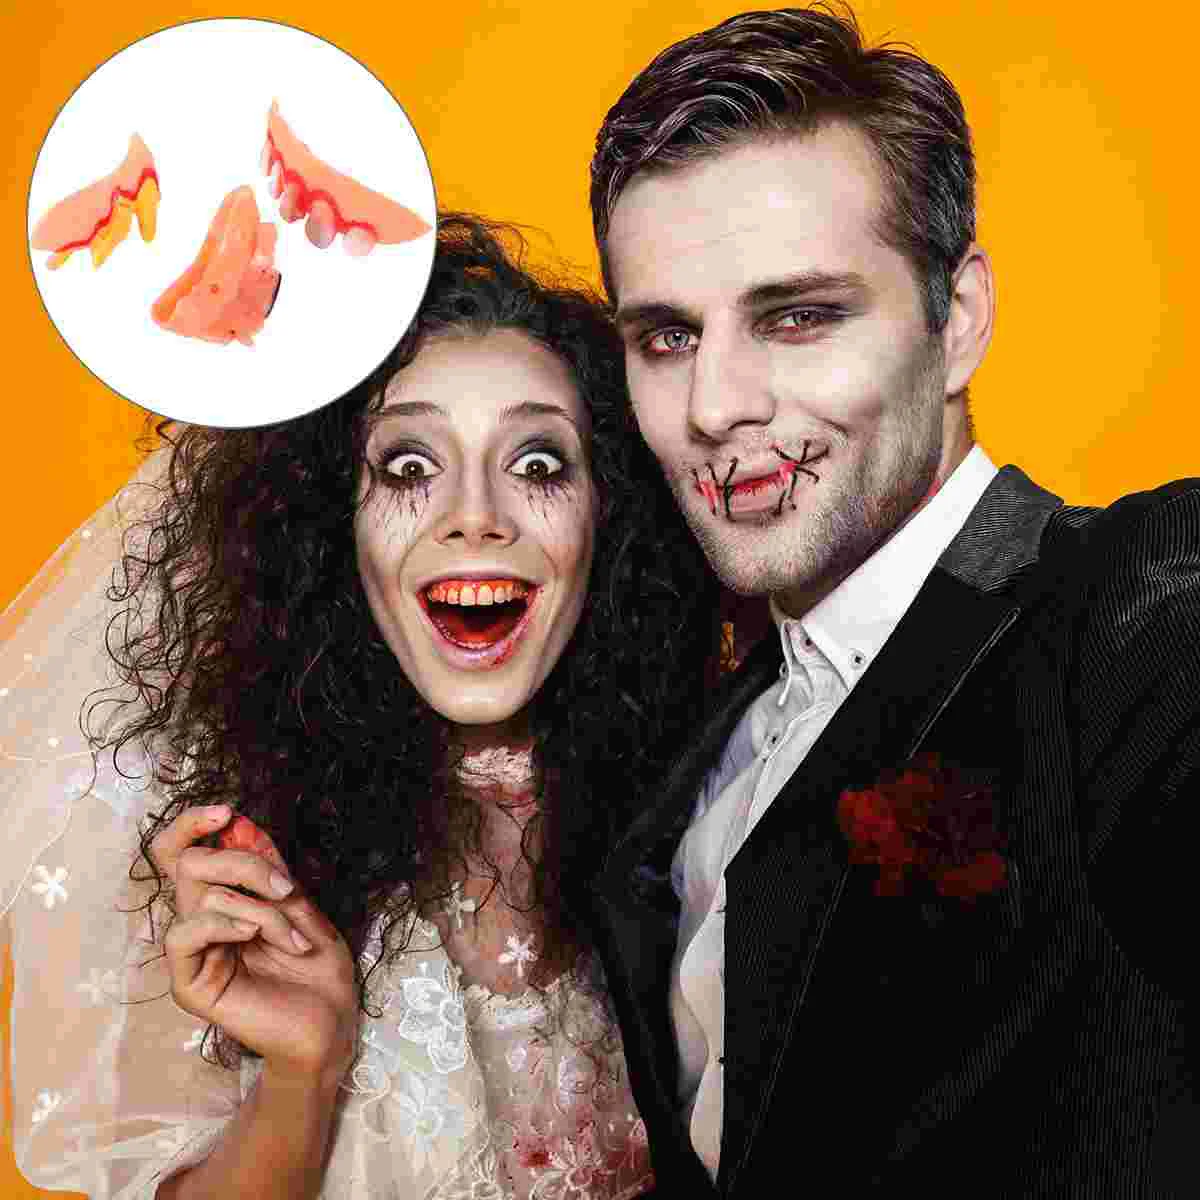 

20pcs Halloween Fake Teeth Artificial Zombies Teeth Props Denture Model for Party Masquerade Costume (Mixed Style)